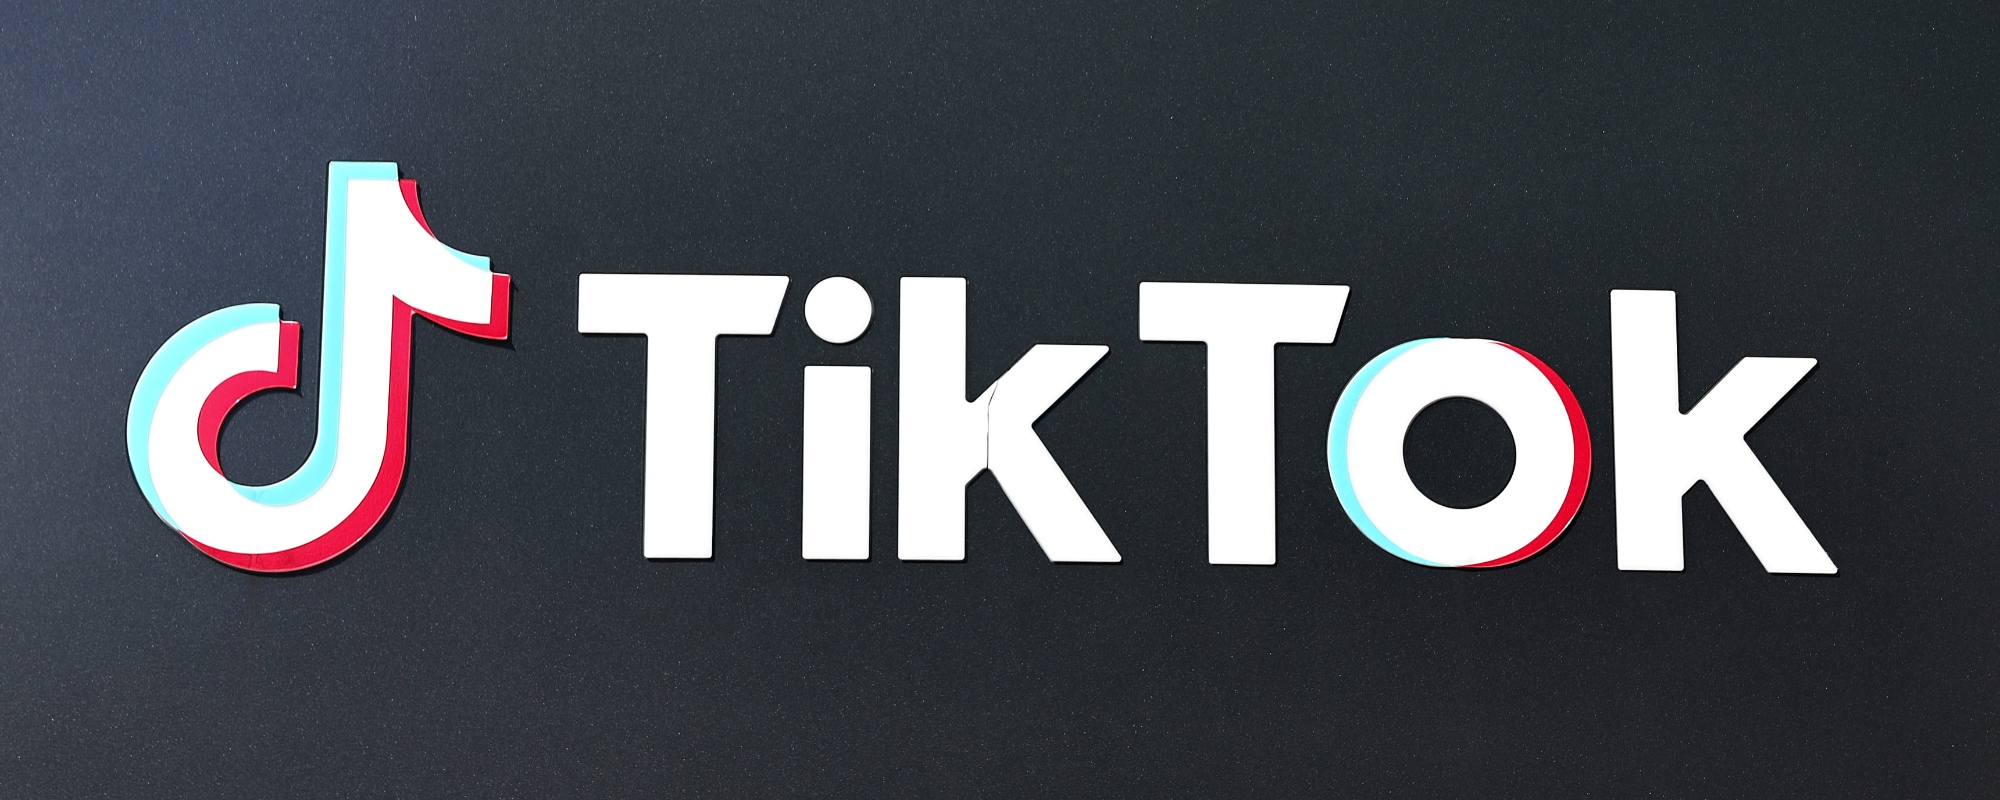 Will Muted TikTok Videos Be Restored Now That Universal Music Group Has Reached a Licensing Agreement?